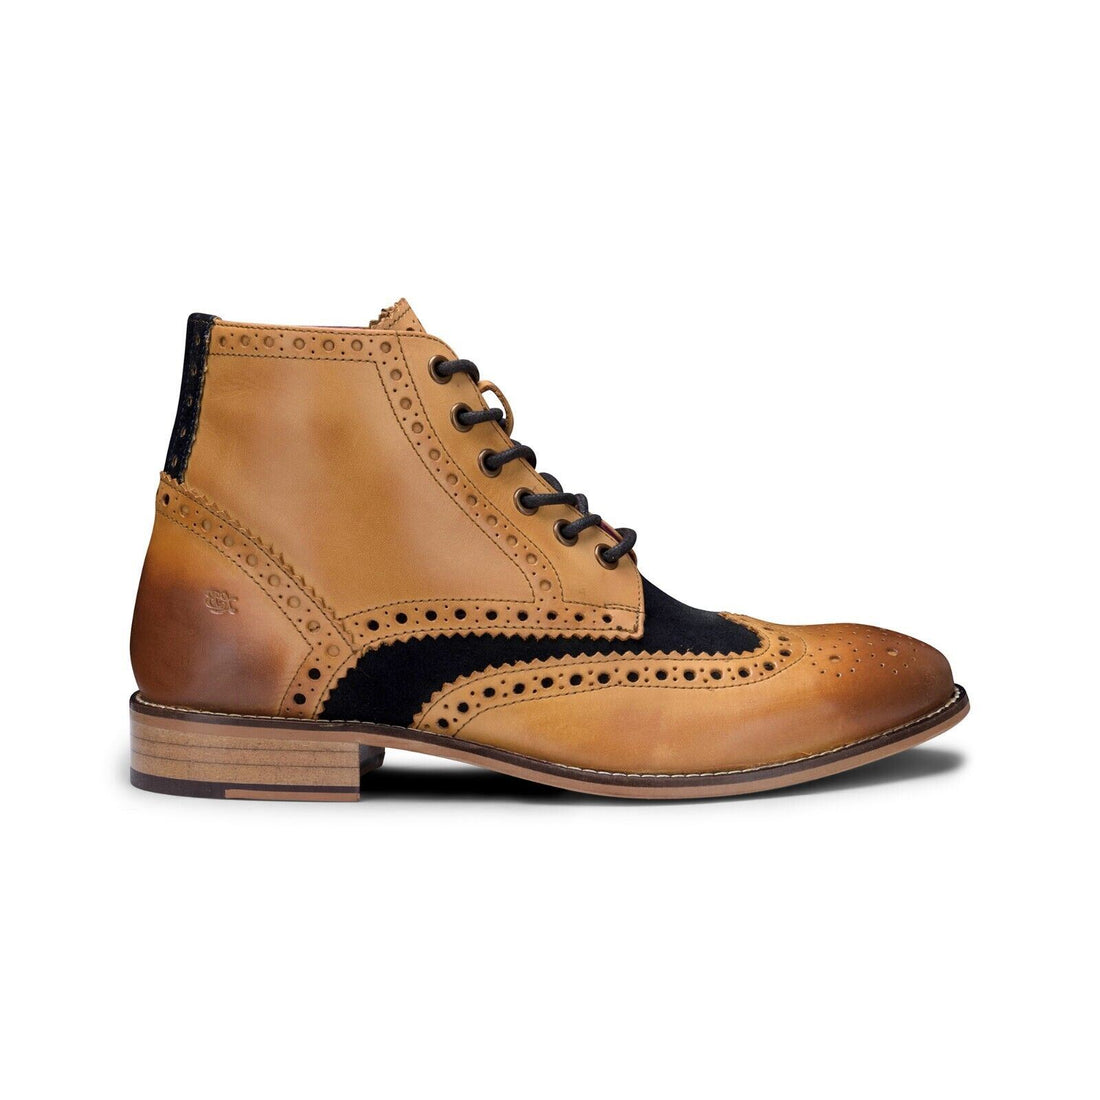 Mens Classic Oxford Tan Leather Gatsby Brogue Ankle Boots with Navy Suede - Upperclass Fashions 